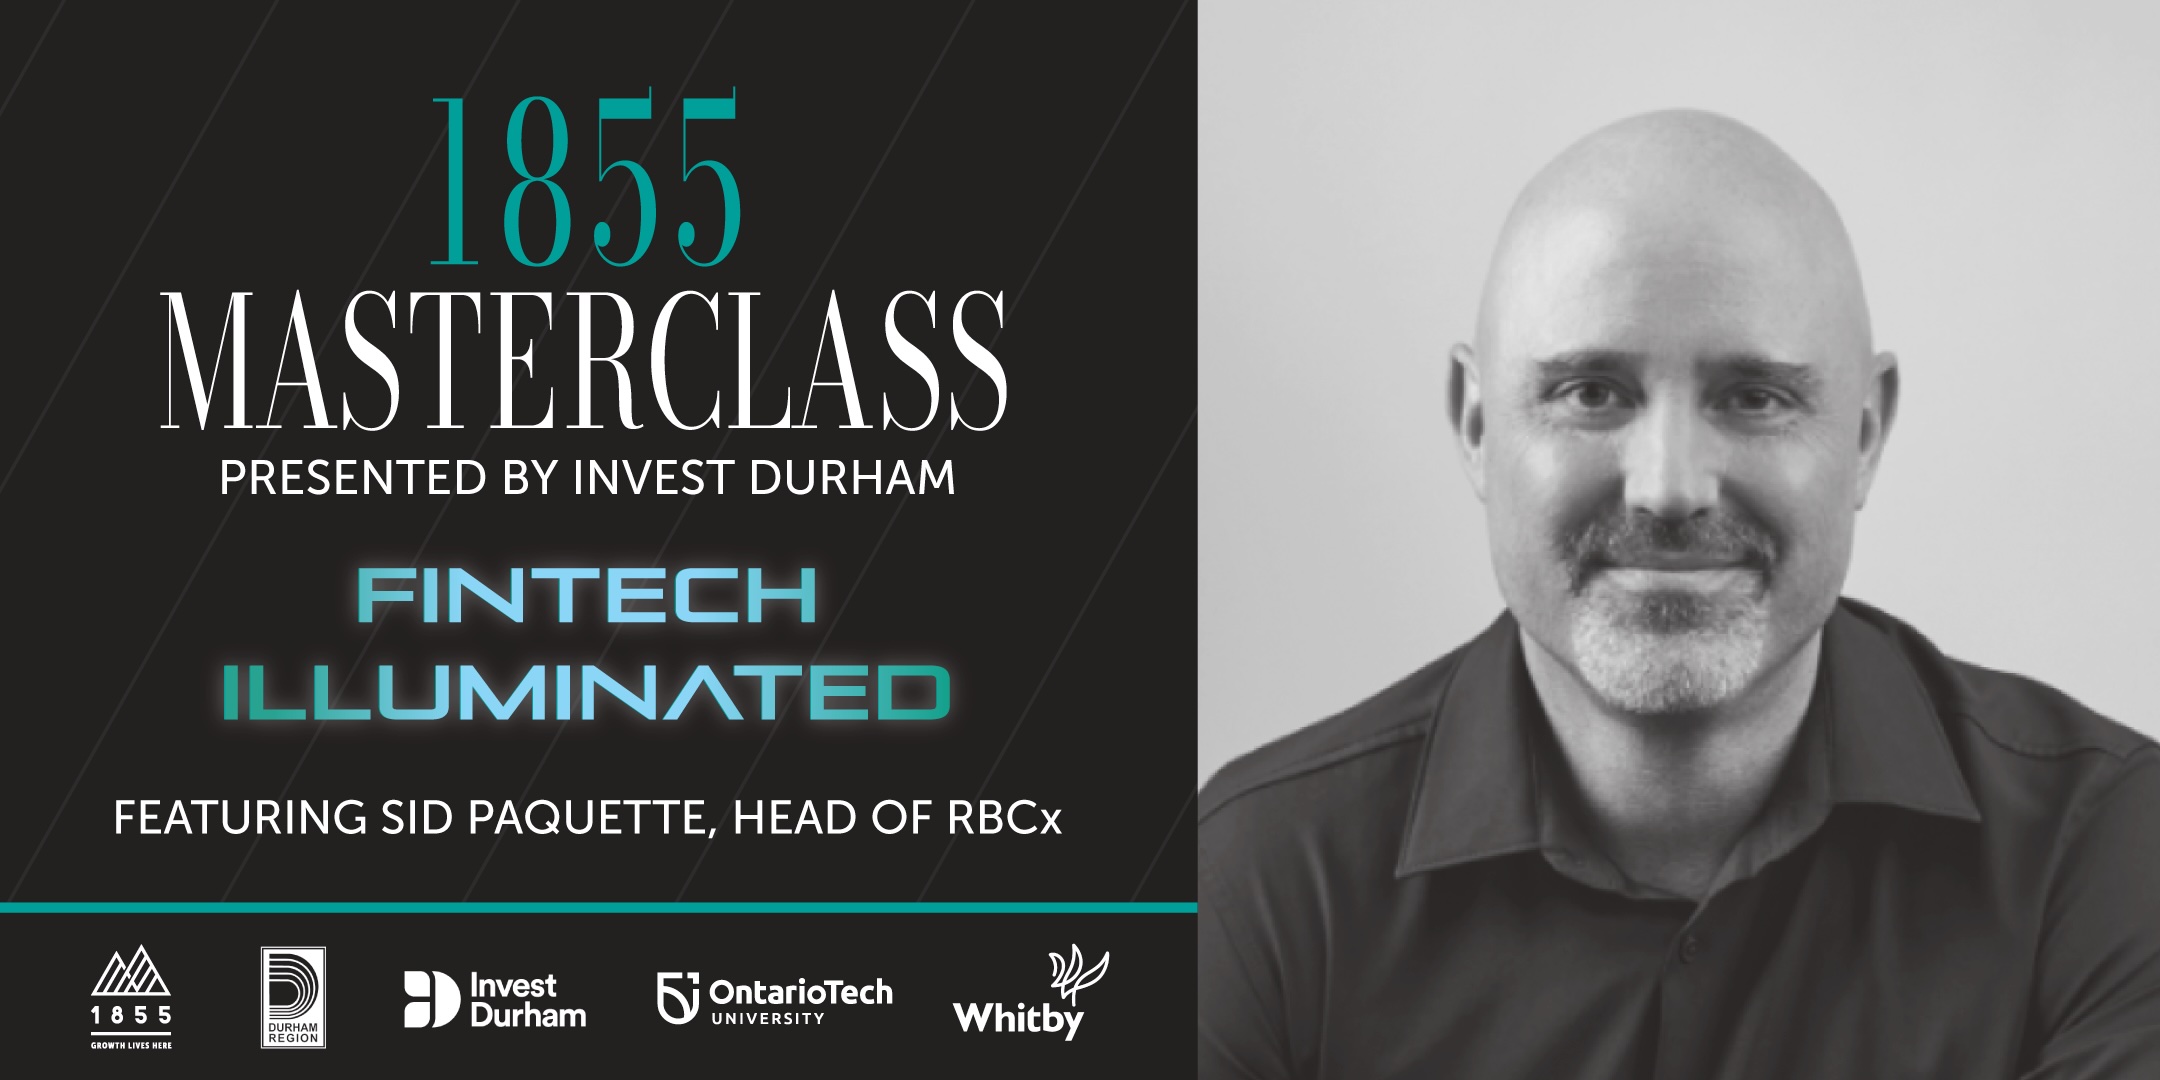 Graphic that reads, "1855 Masterclass Presented by Invest Durham, Fintech Illuminated" with a headshot of the keynote speaker.